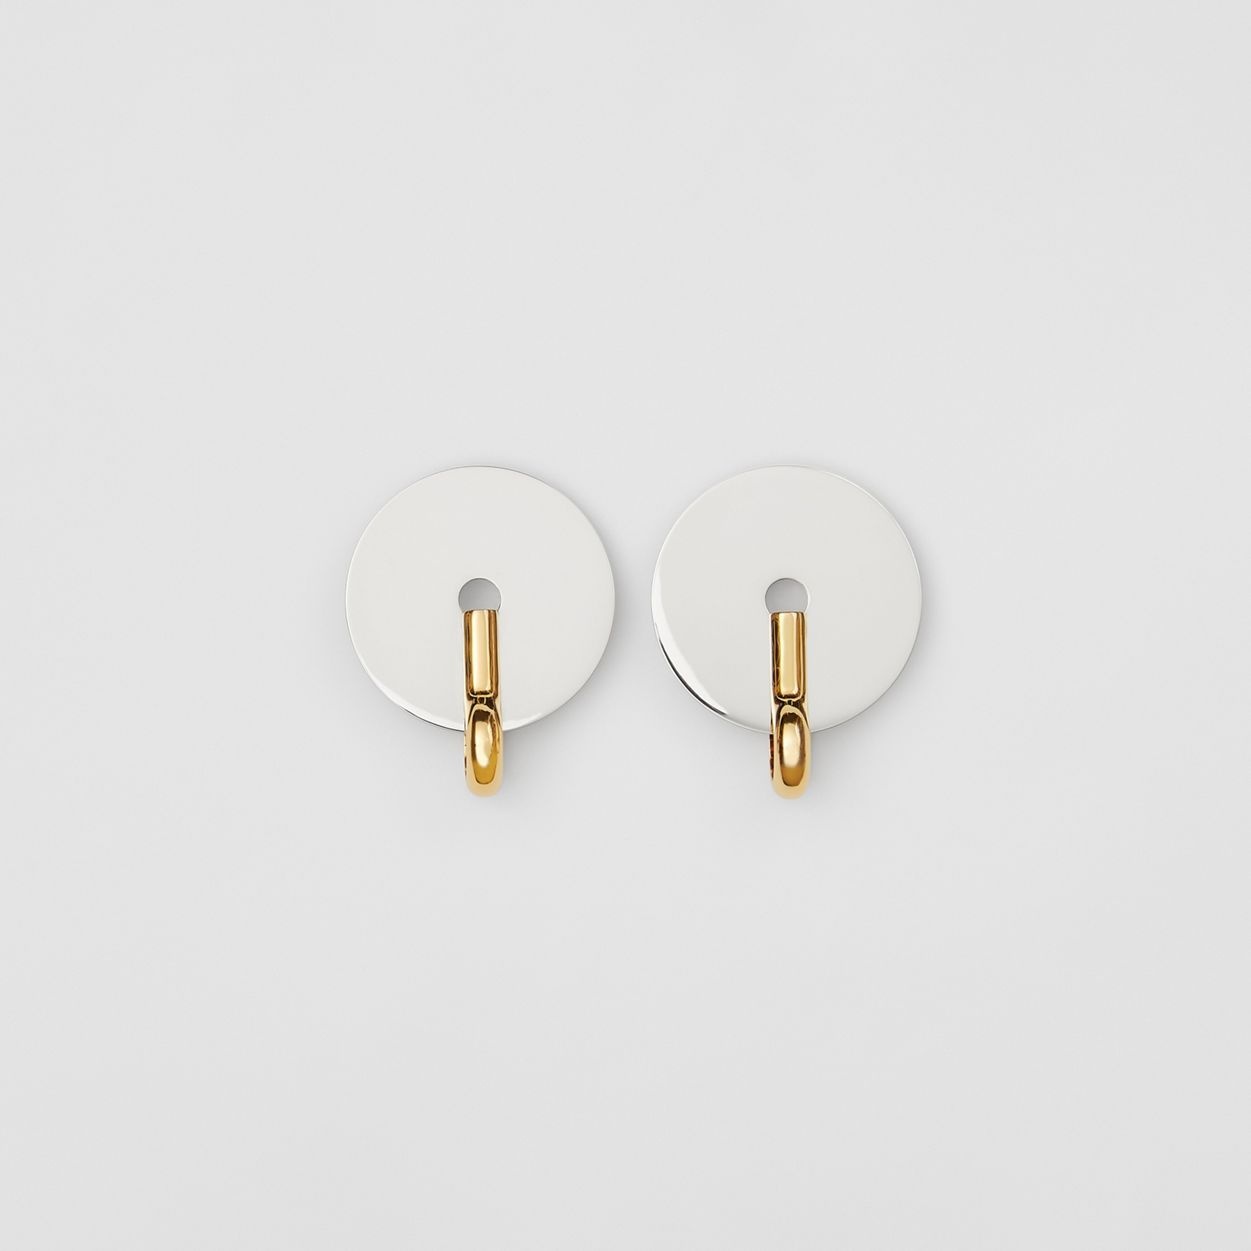 Palladium and Gold-plated Disc Earrings - 1